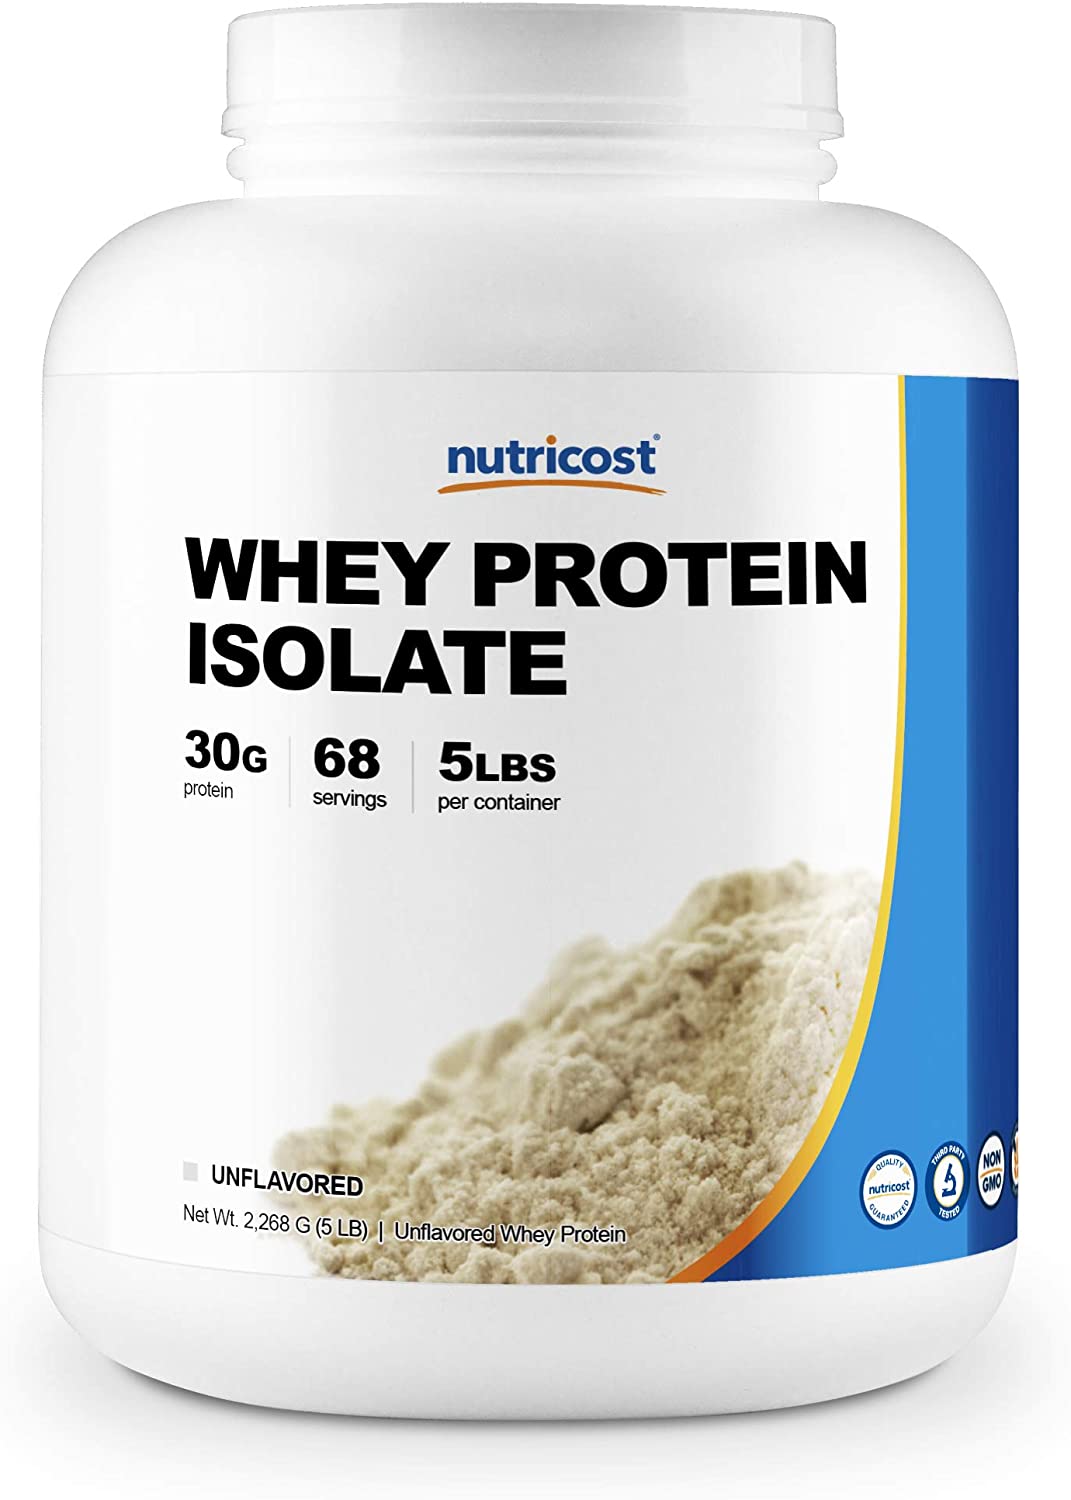 Whey Protein Isolate Nutricost